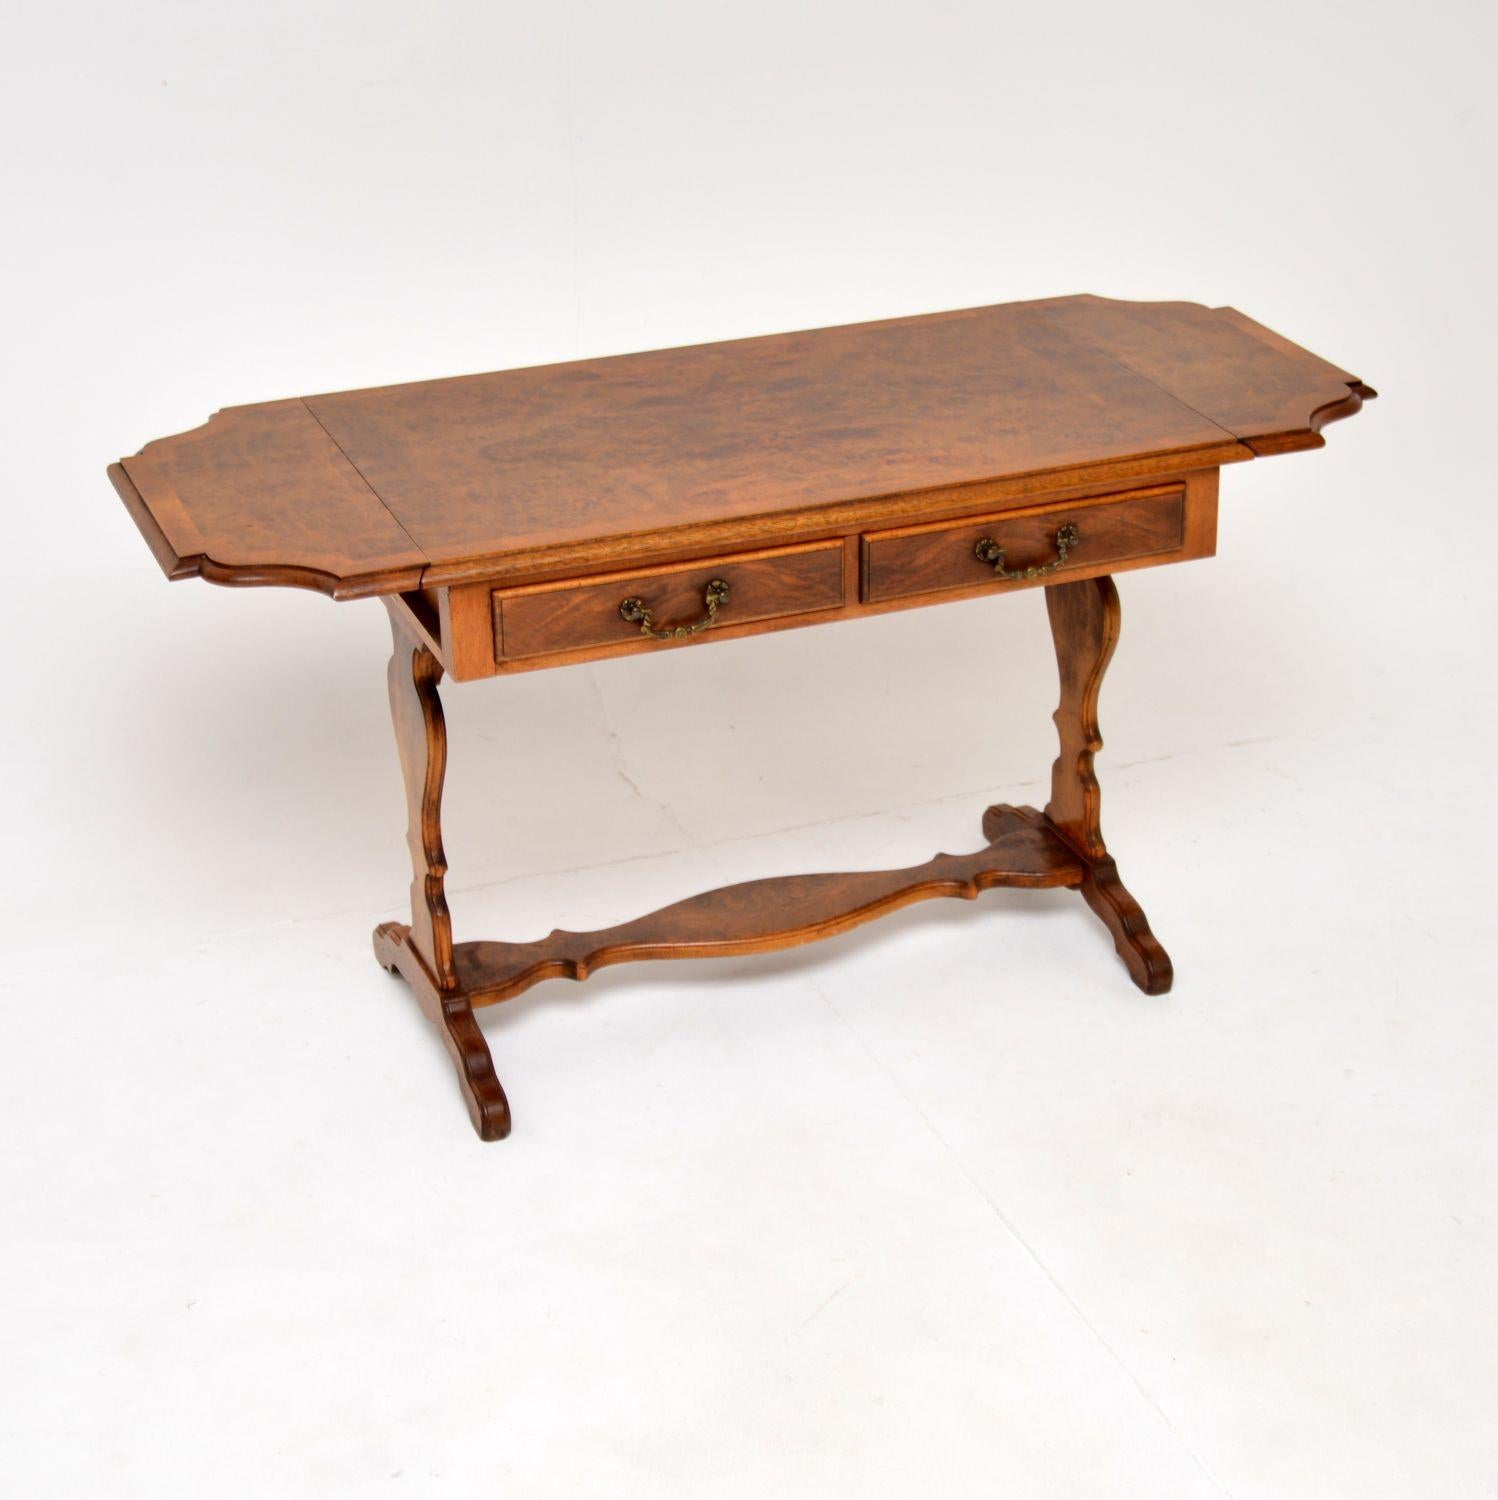 A beautiful antique drop leaf coffee table or side table in burr walnut. This was made in England, it dates from around the 1930’s.

It is very well made and is of excellent quality. It is a useful size, and the drop ends can be lifted to extend the